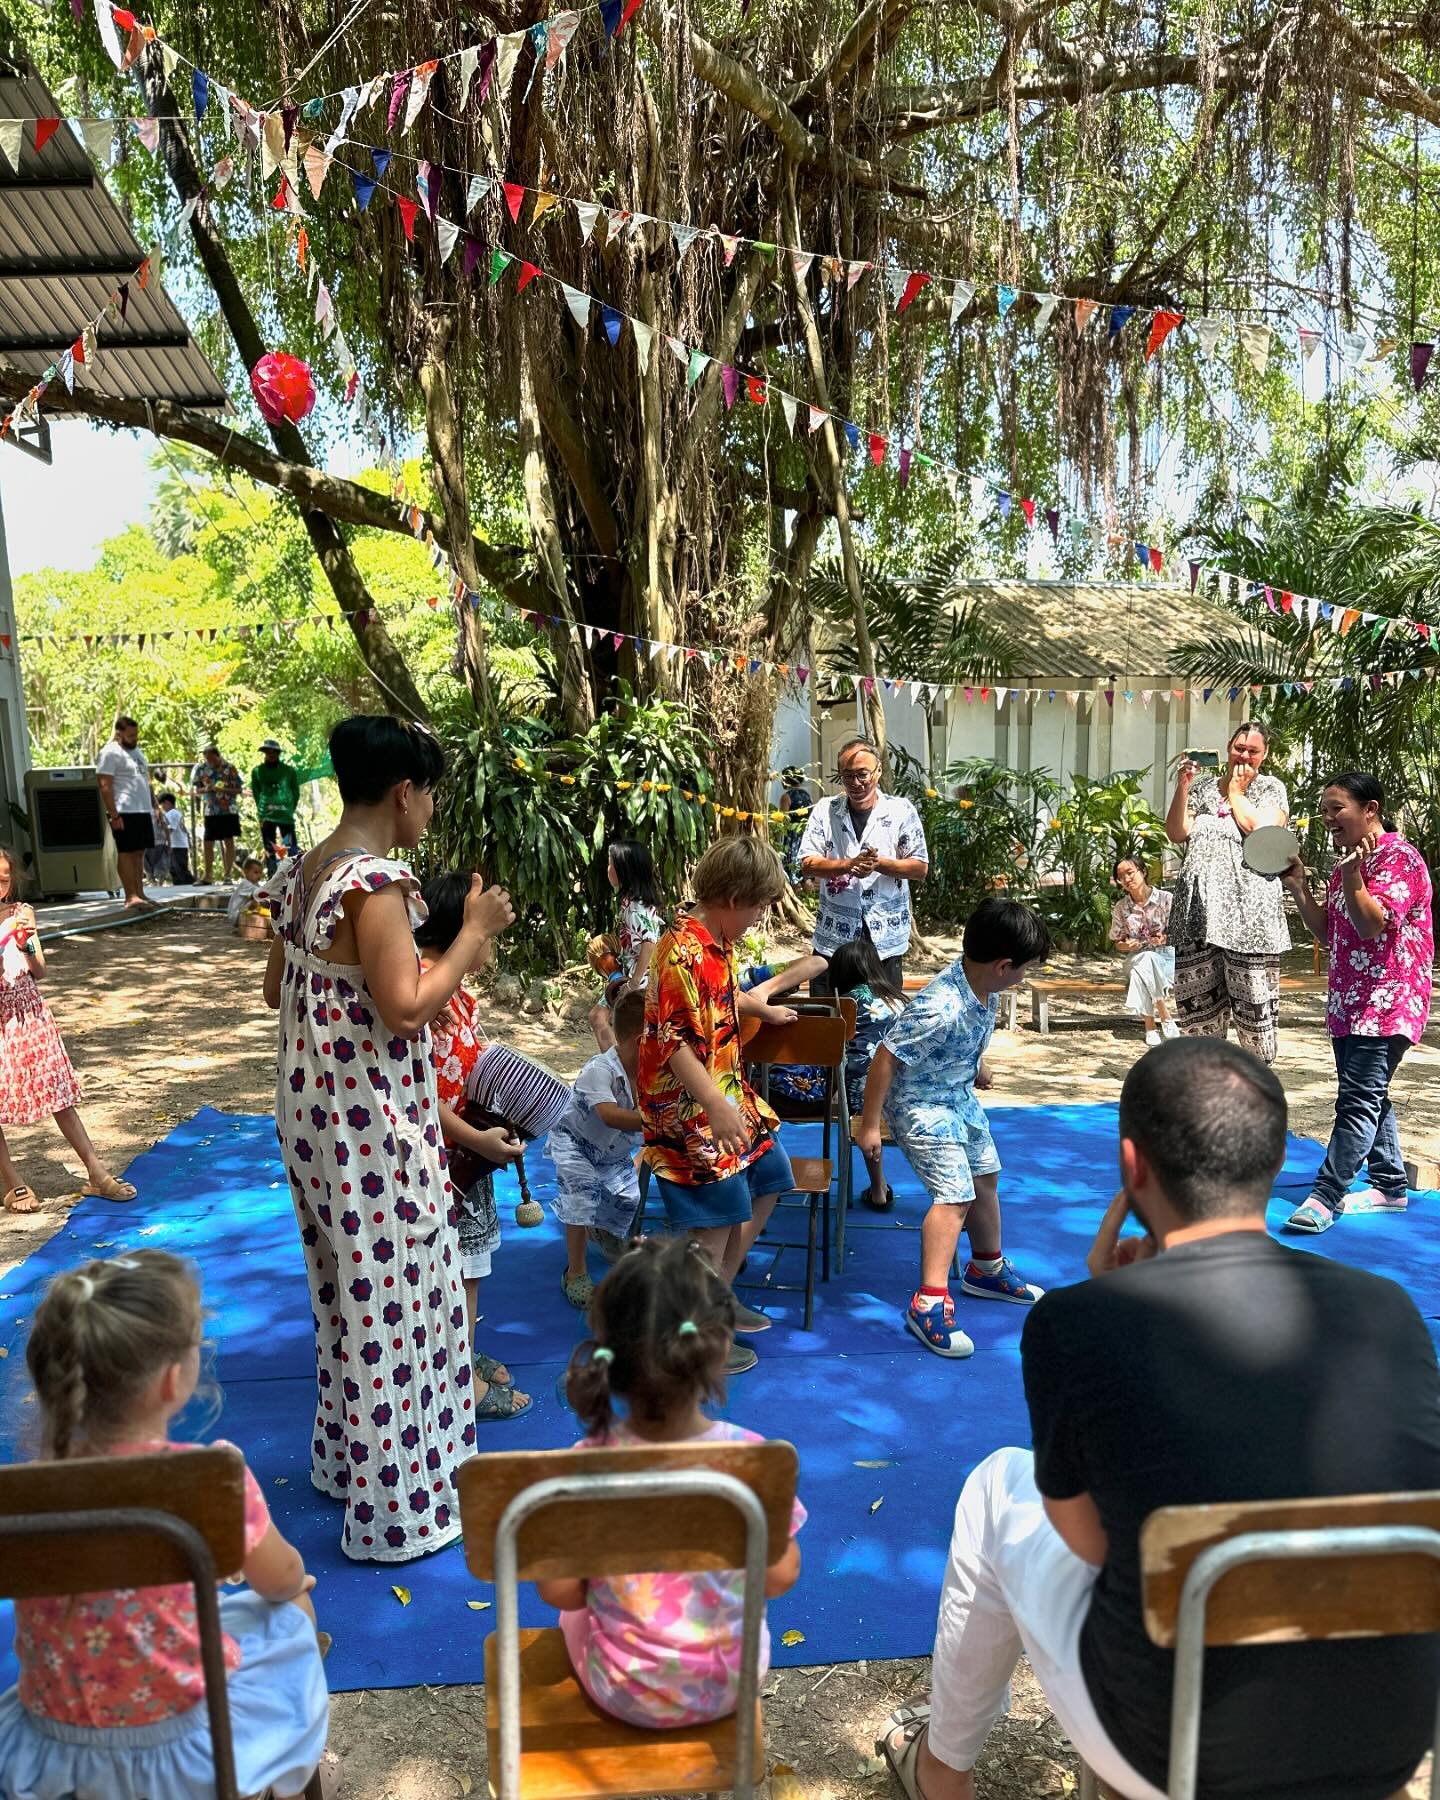 SONG-KRAN
We would like to thank all parents who attended our Song - Kran event and hope it was enjoyed by all. From the entertainment by the students; our short Thai cultural  experience; great food to the fun and games. We had many observations on 